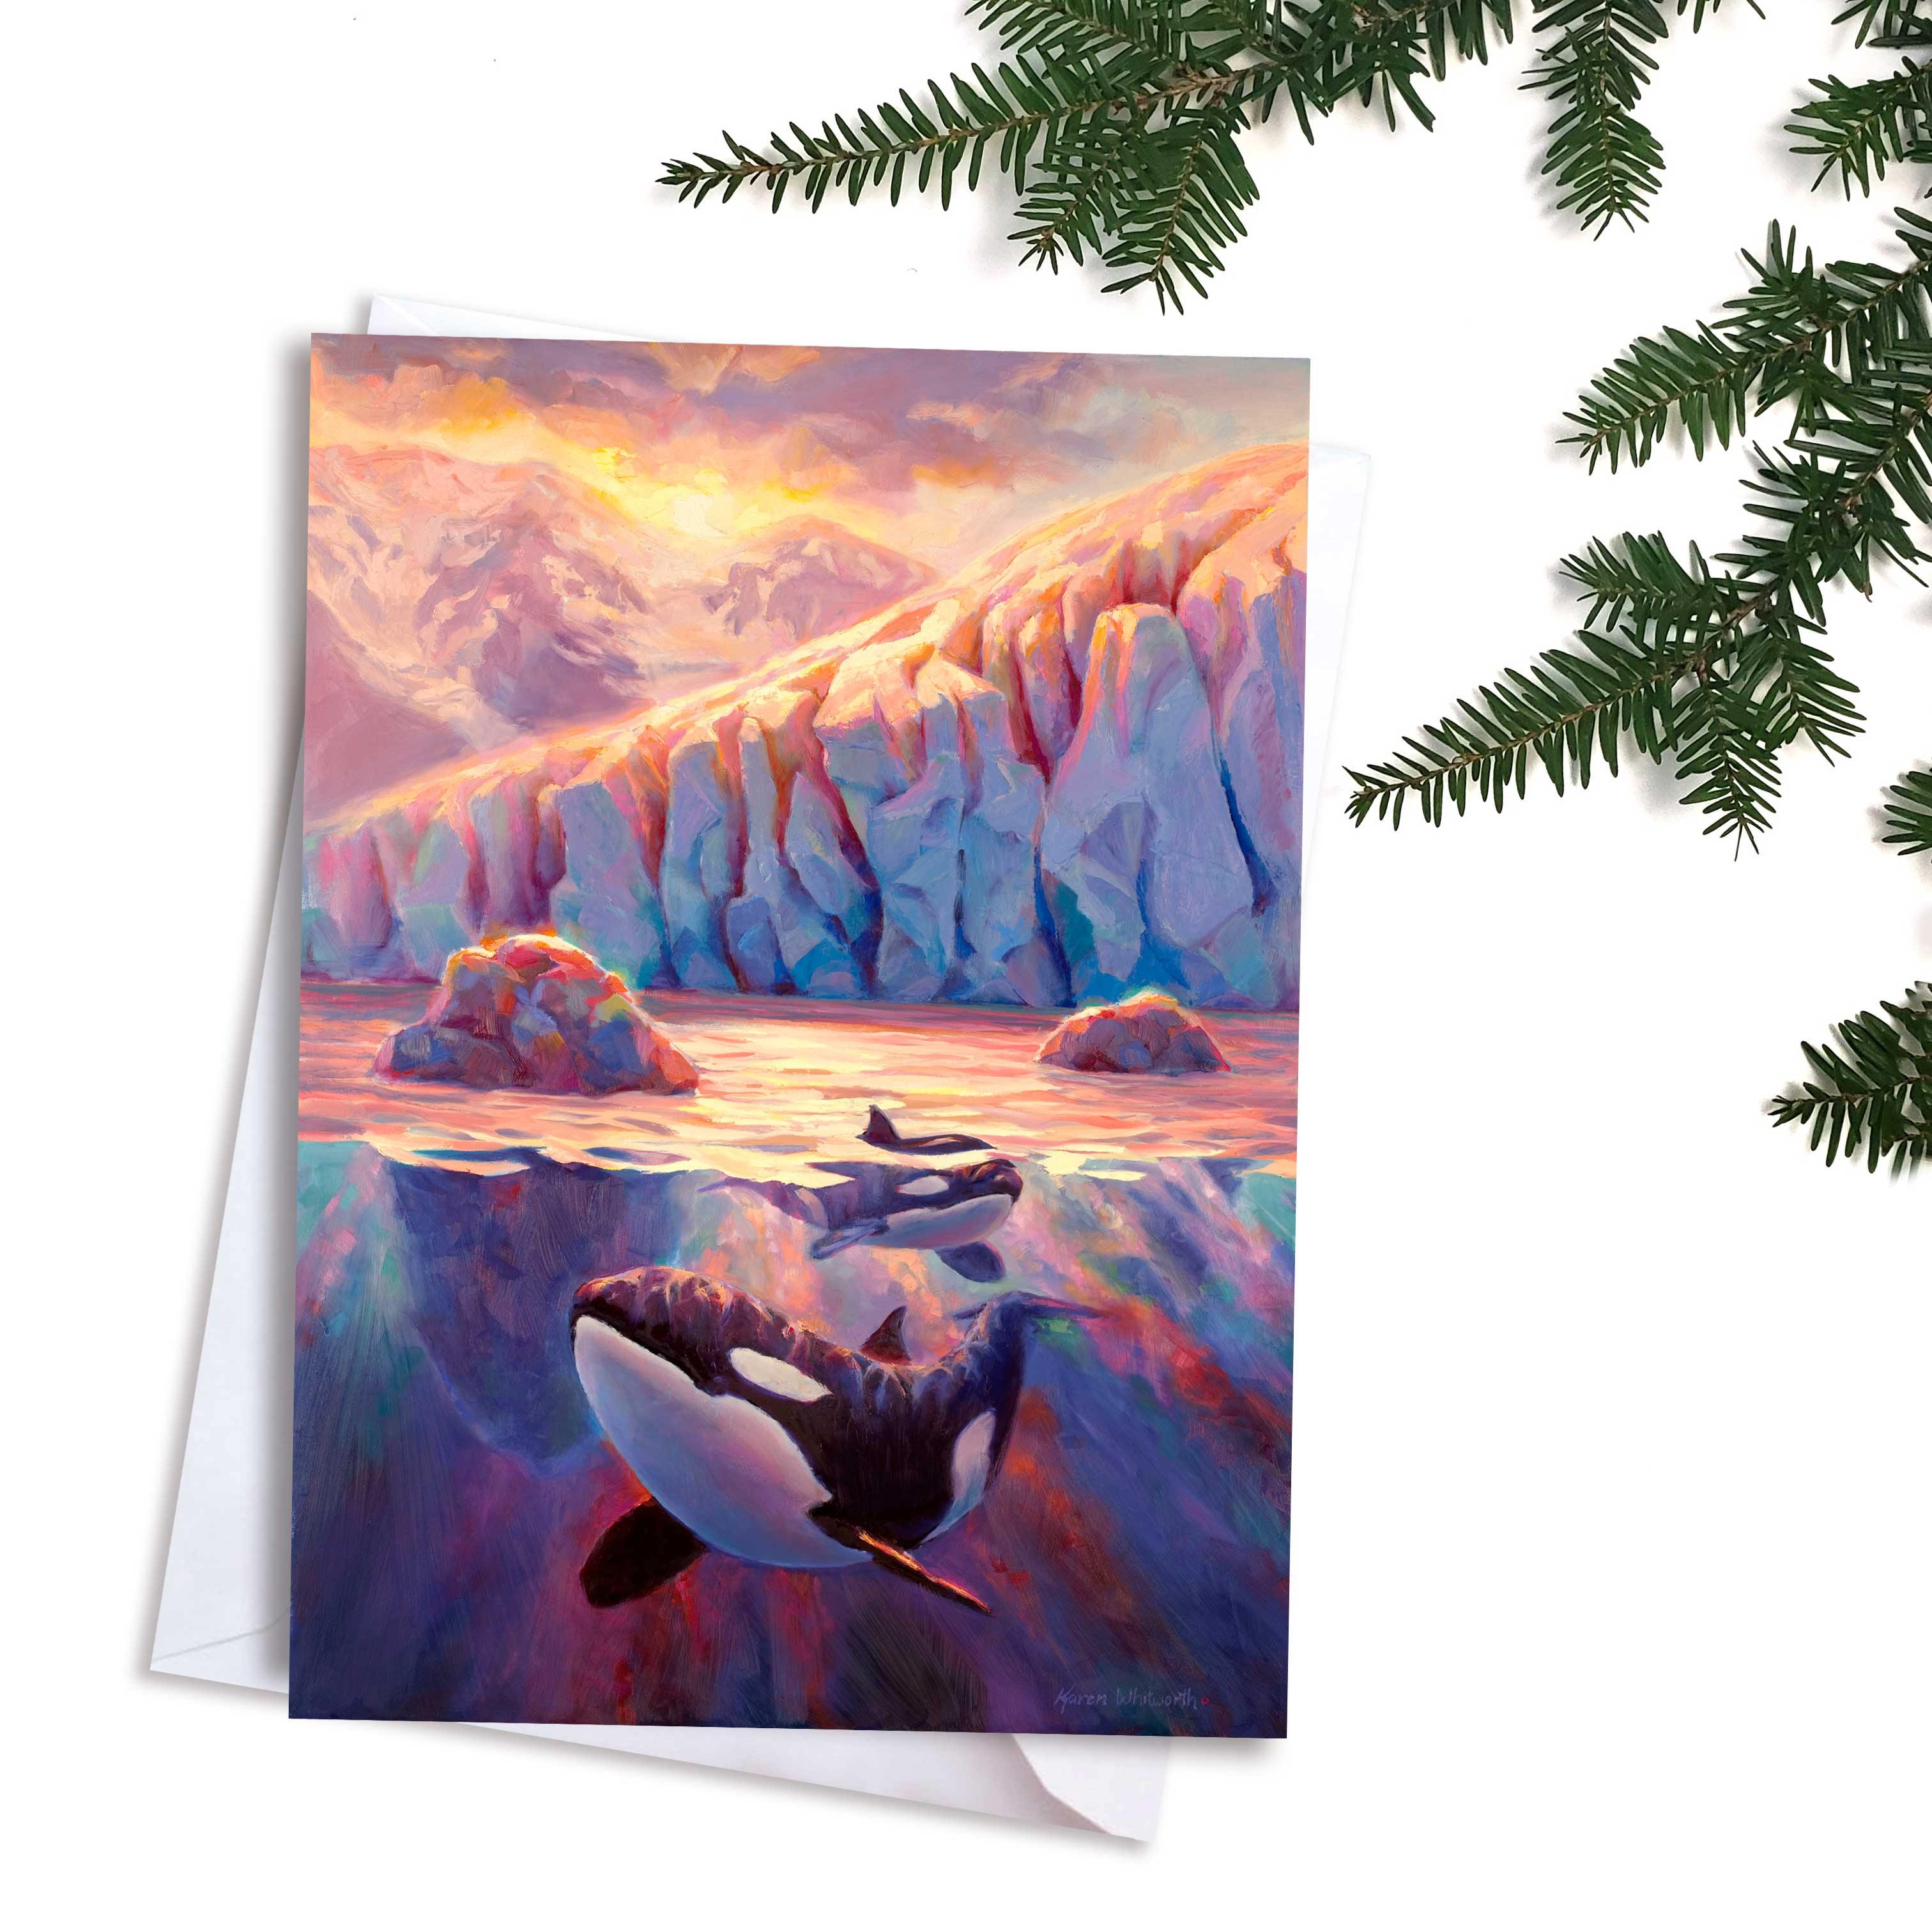 Orca Killer Whale greeting card with Glacier Fjord at Sunrise by Alaska artist Karen Whitworth